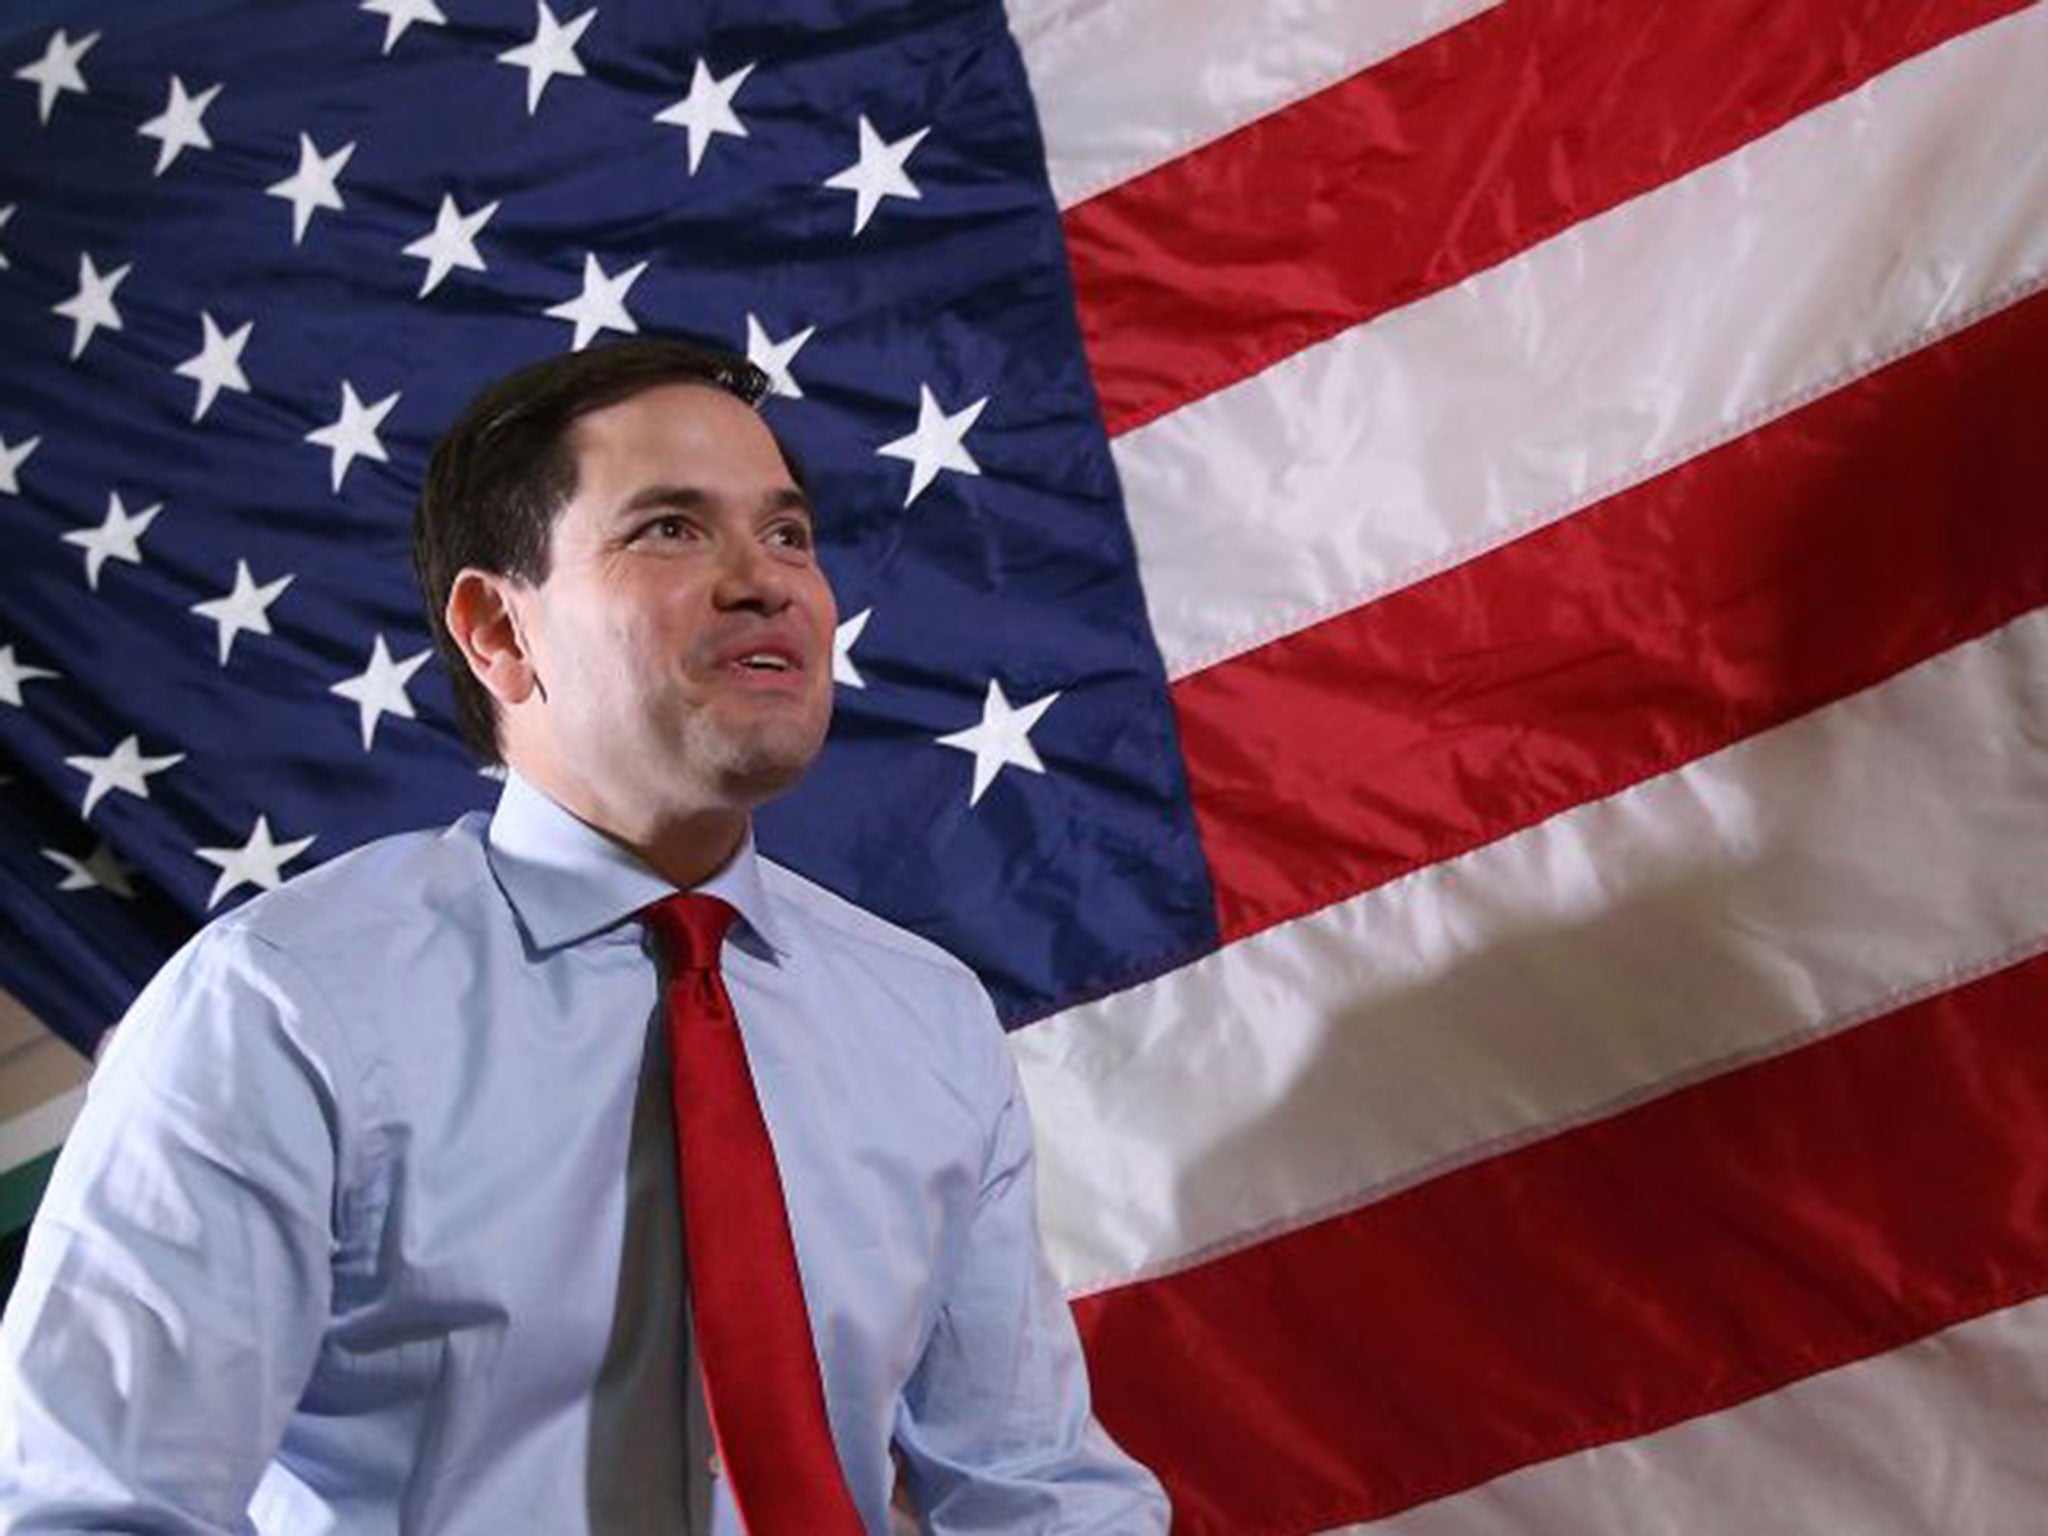 &#13;
Marco Rubio promised to defy the pollsters who put him behind in Florida &#13;